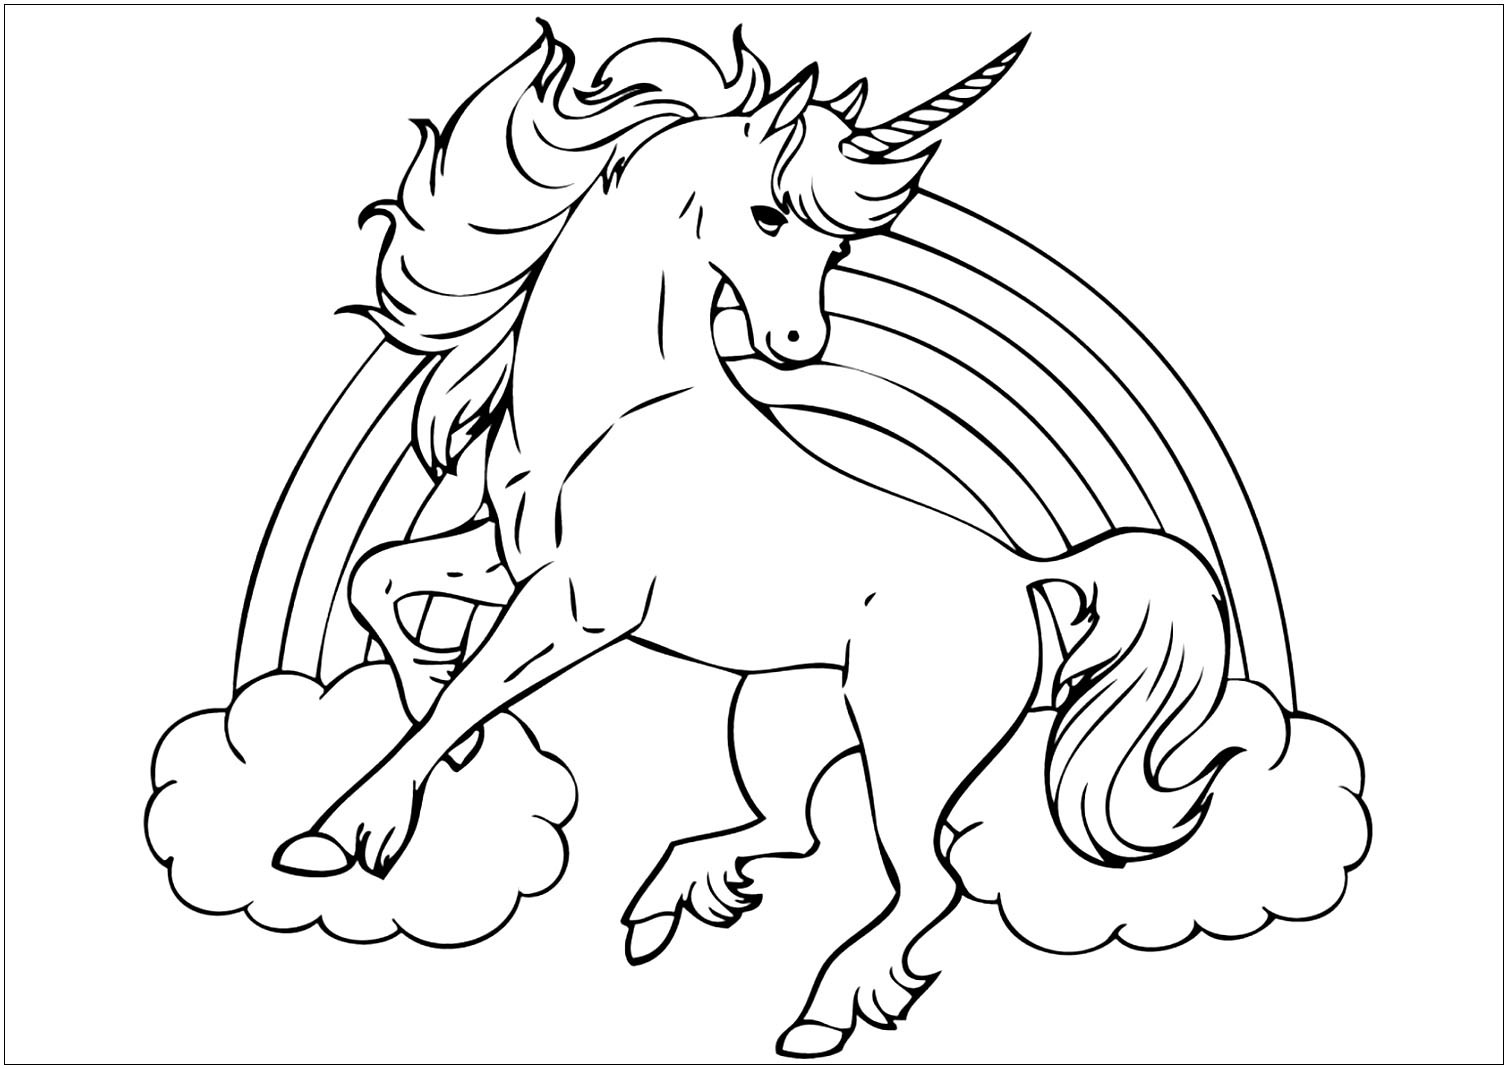 Unicorn Coloring Sheets For Kids
 Unicorns to Unicorns Kids Coloring Pages